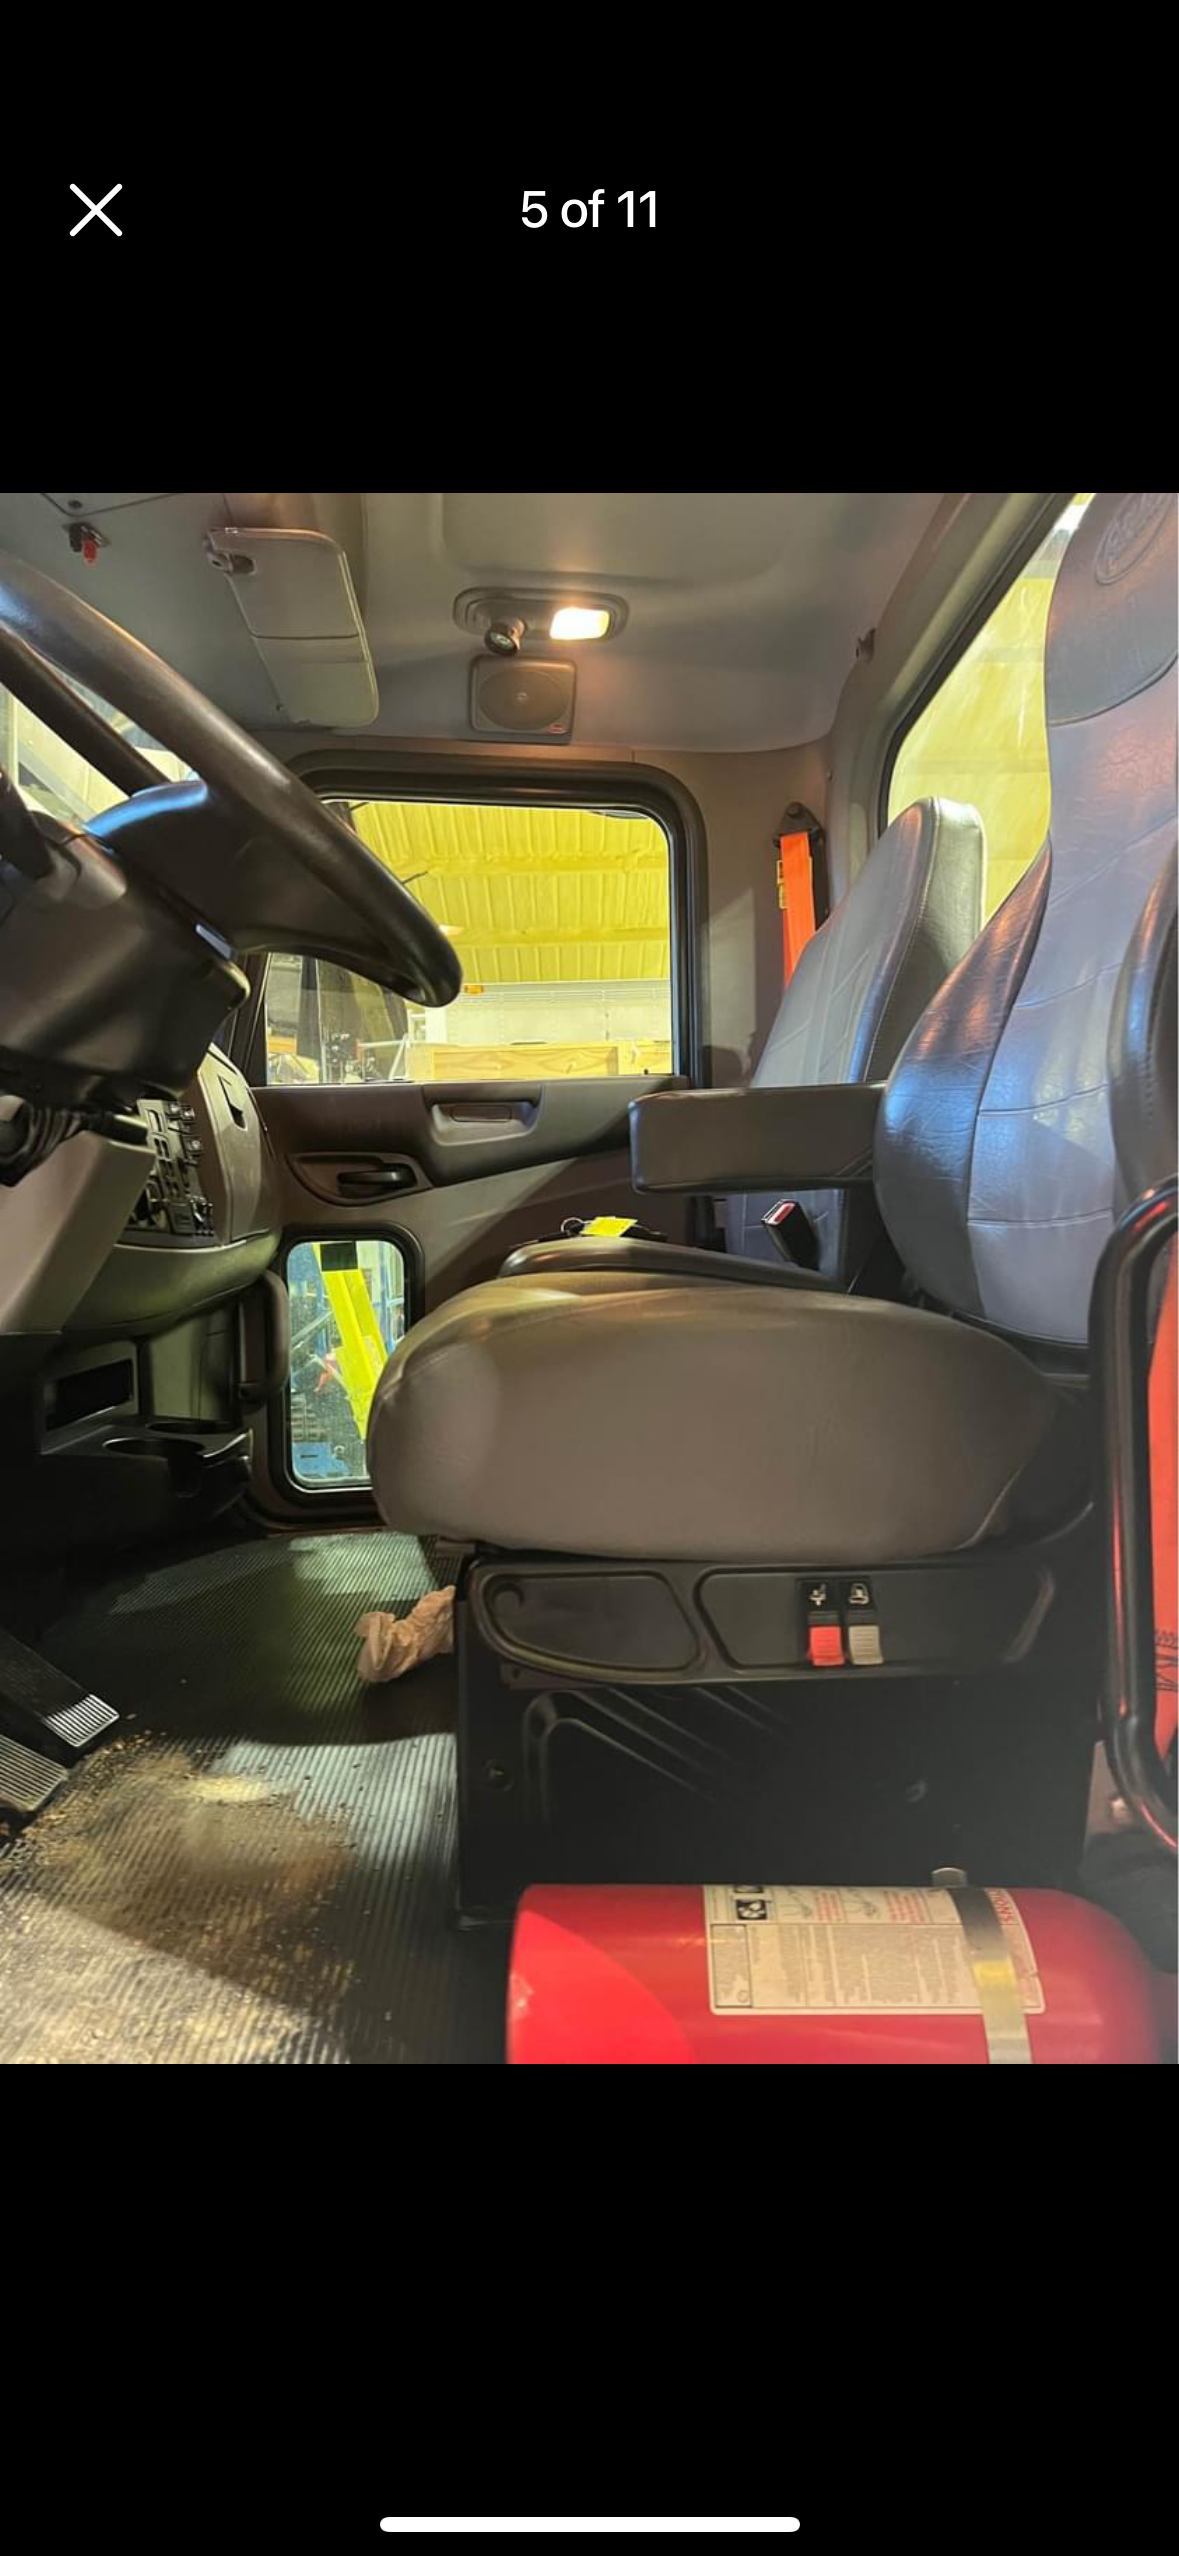 The inside of a truck with a steering wheel and seats.